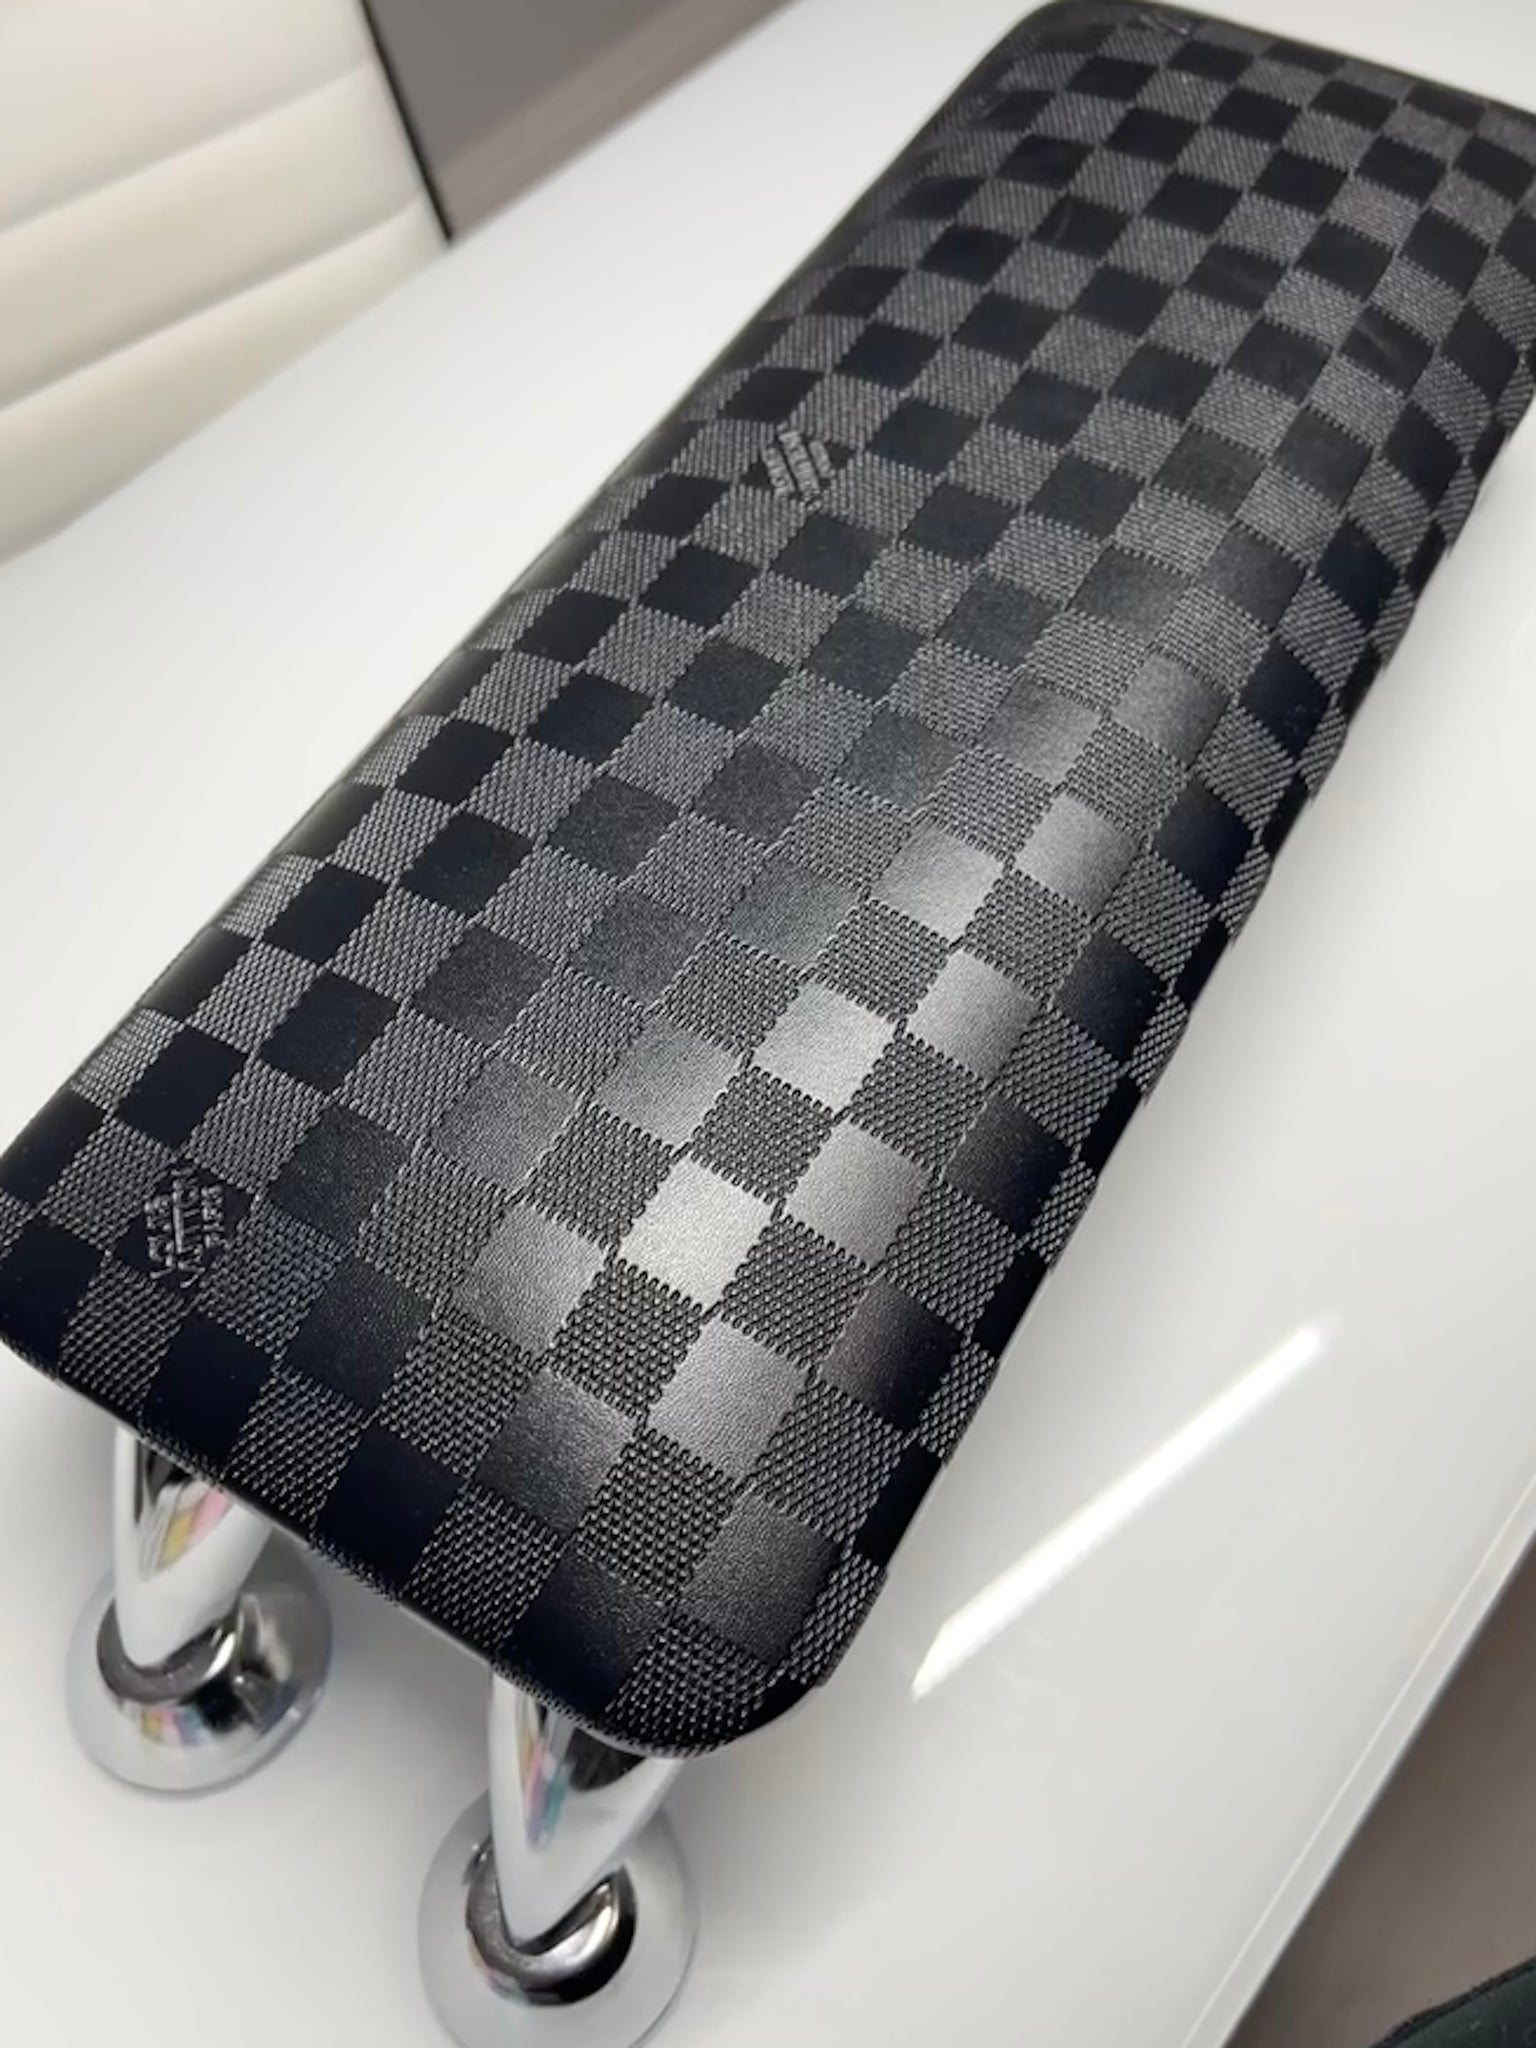 LV ARM REST 💅 Now available on Website Zulaysnails.bigcartel.com #nailart # nail 